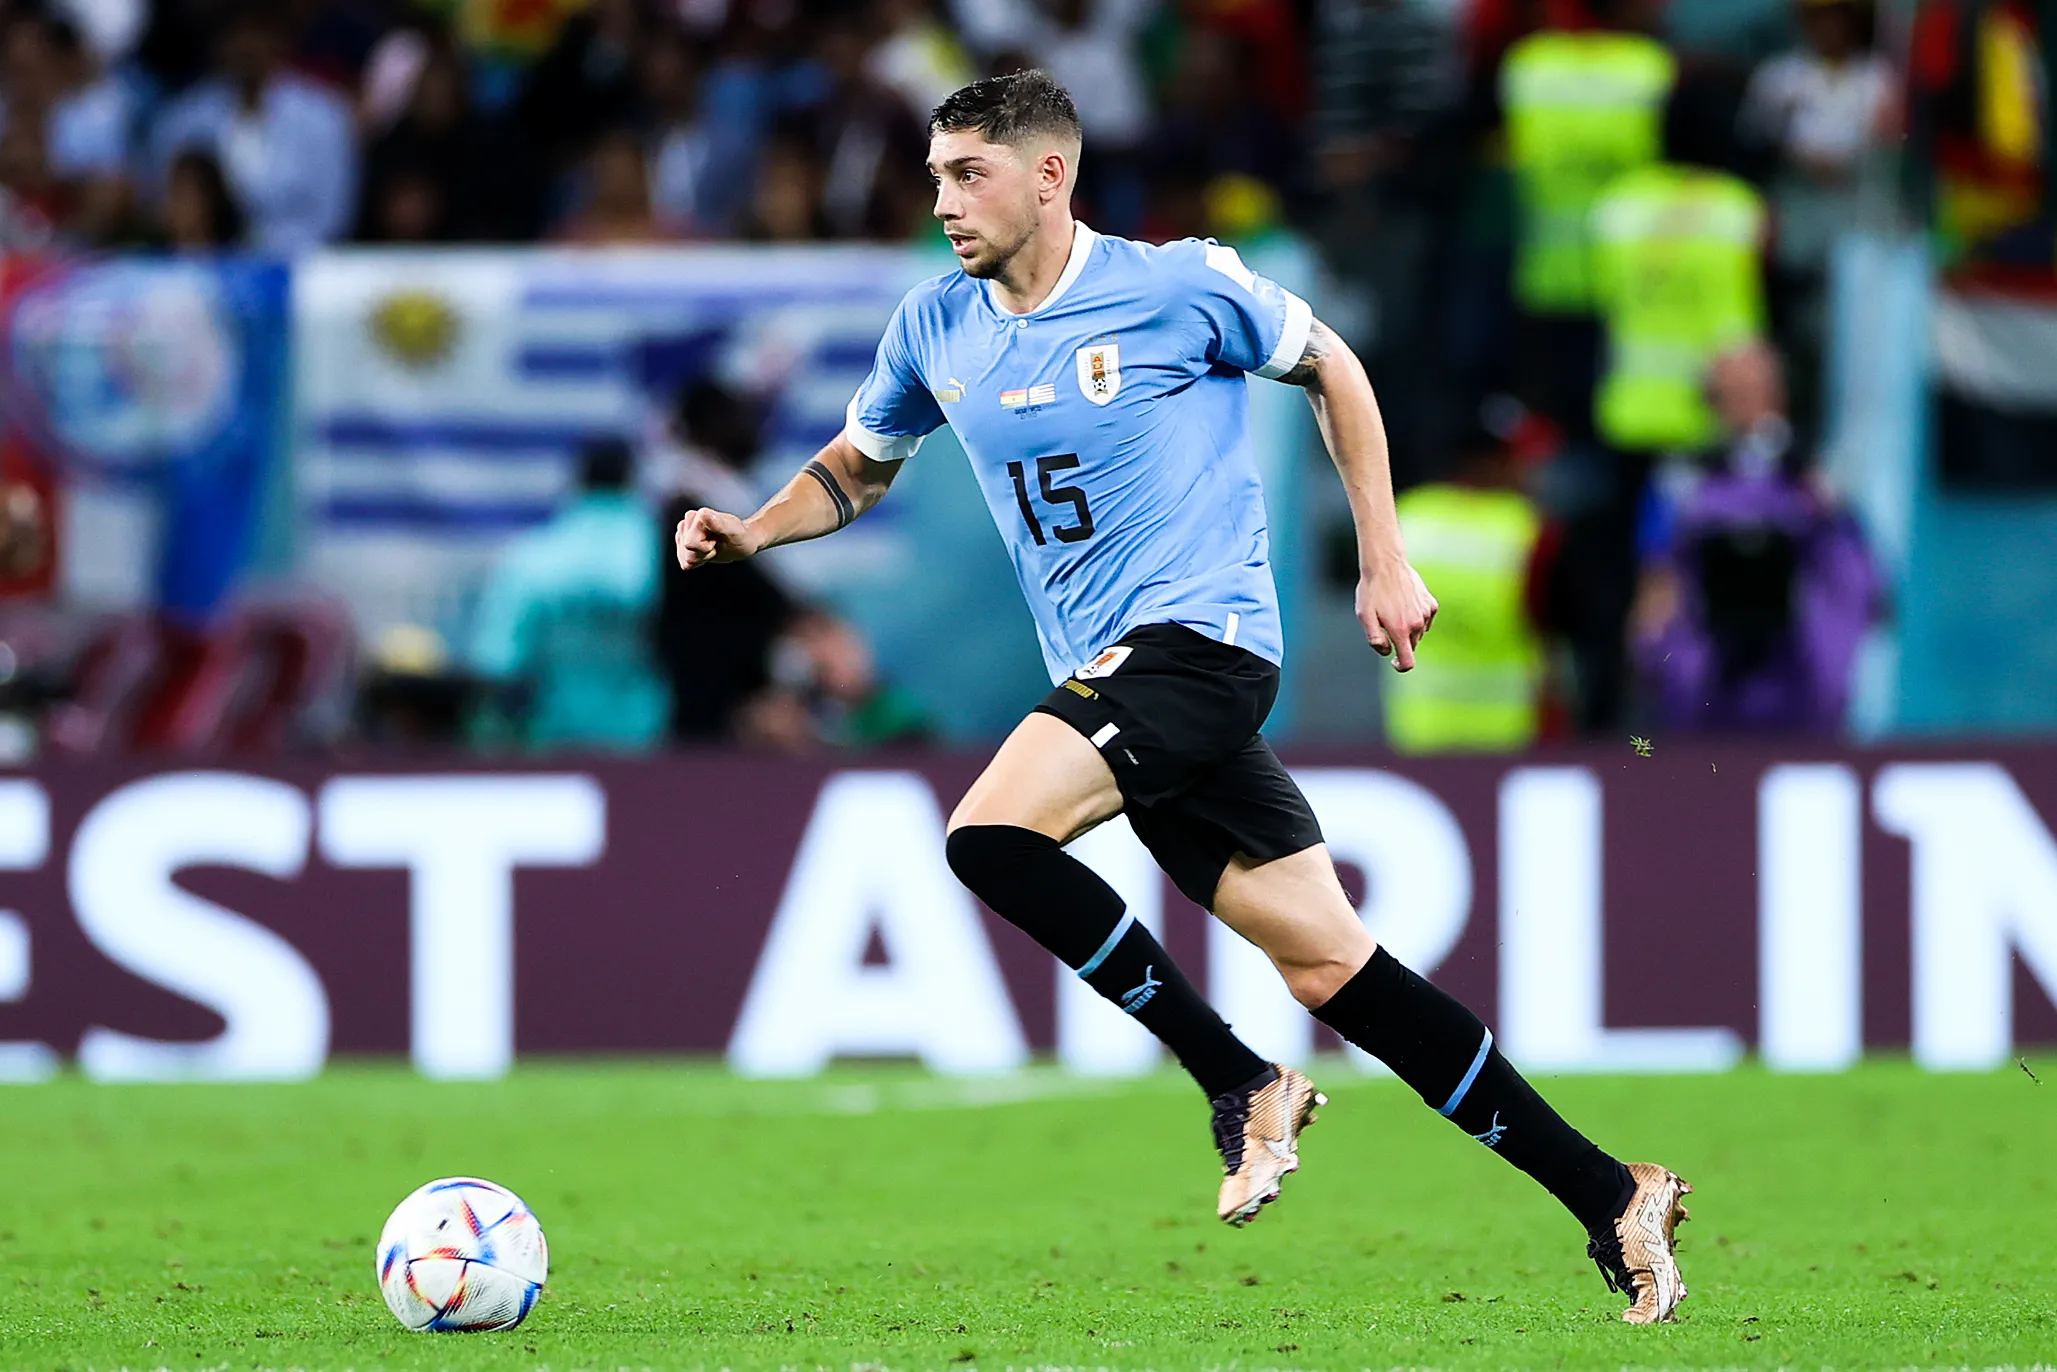 Federico Valverde of Uruguay on the attack during the 2022 FIFA World Cup match between Ghana and Uruguay held at Al Janoub Stadium in Al Wakrah, Qatar on 2 December 2022 © Alain Guy Suffo/Sports Inc - Photo by Icon sport   - Photo by Icon Sport